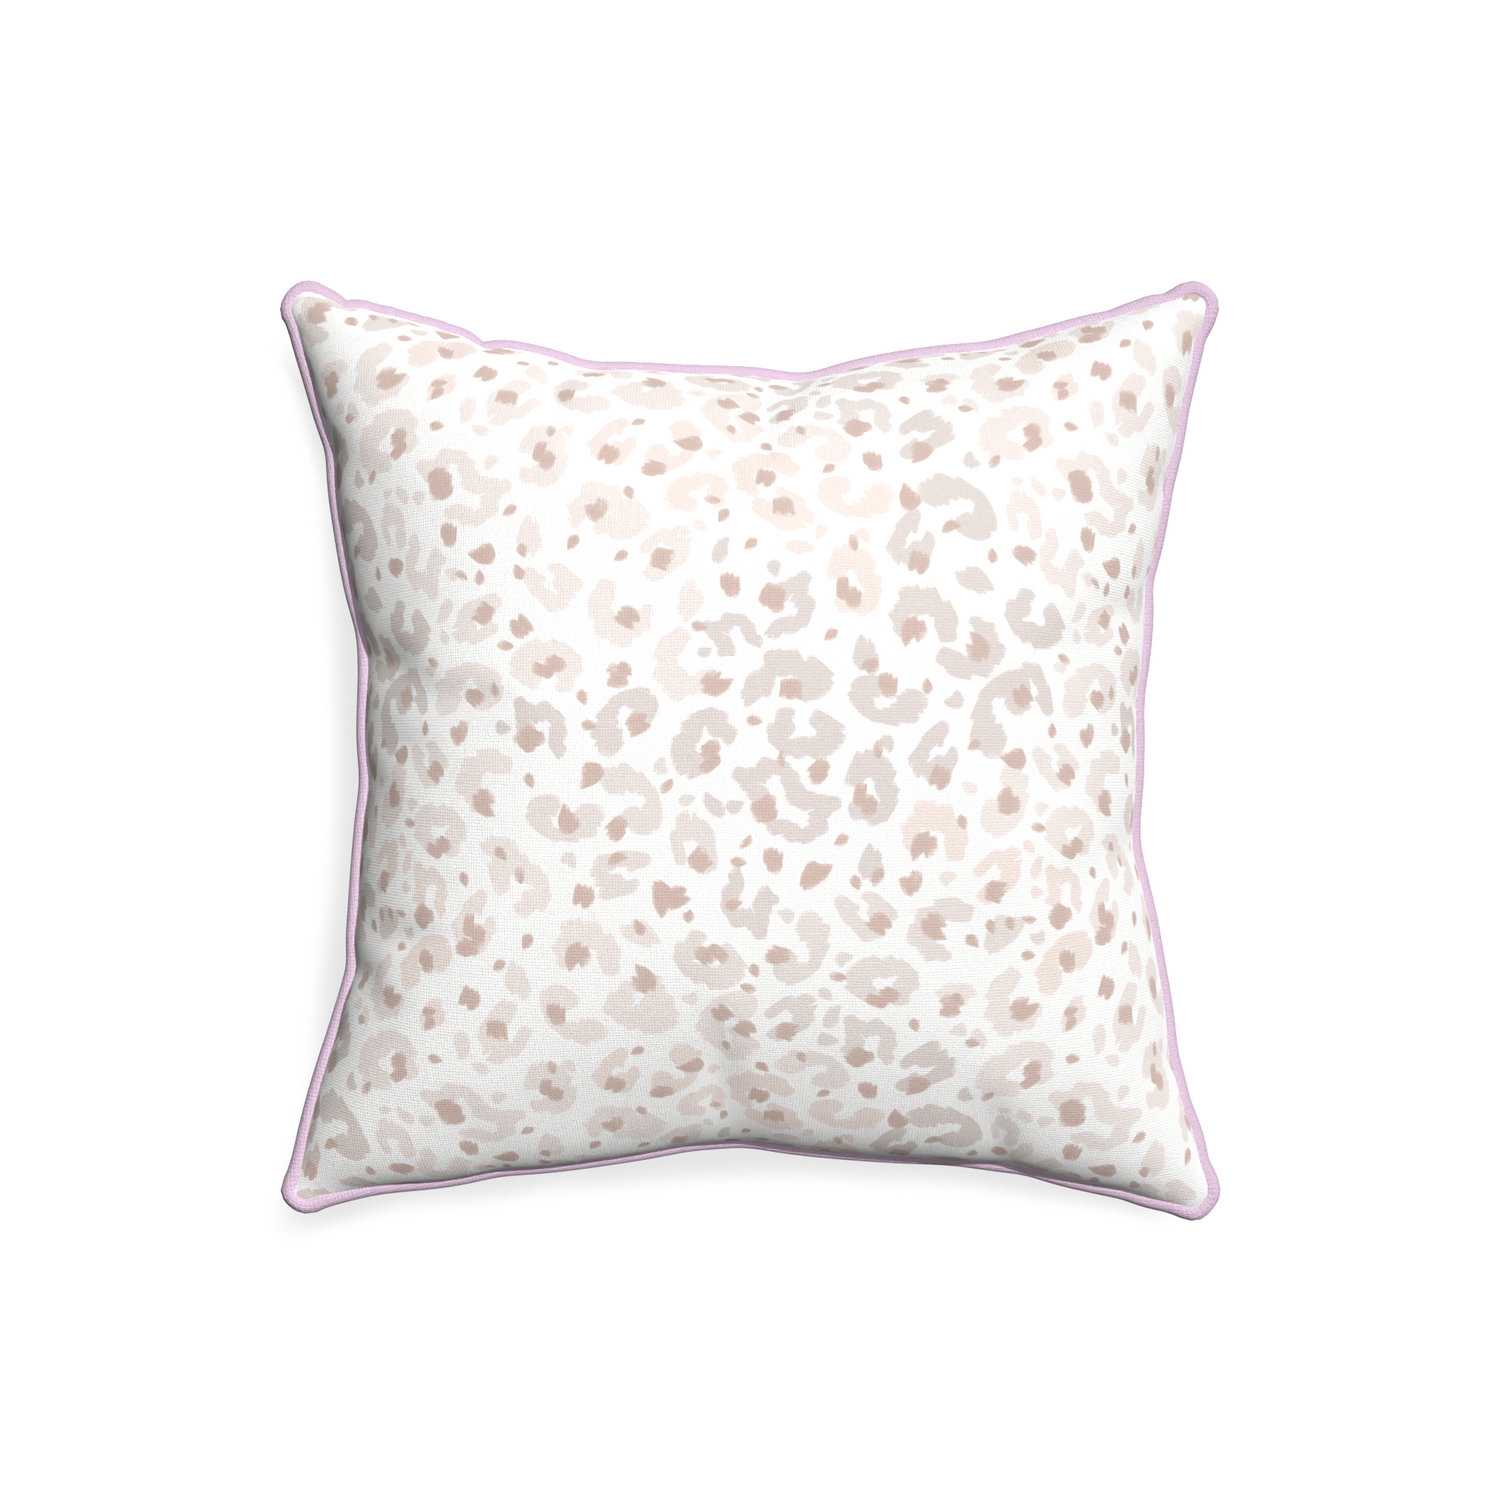 20-square rosie custom pillow with l piping on white background